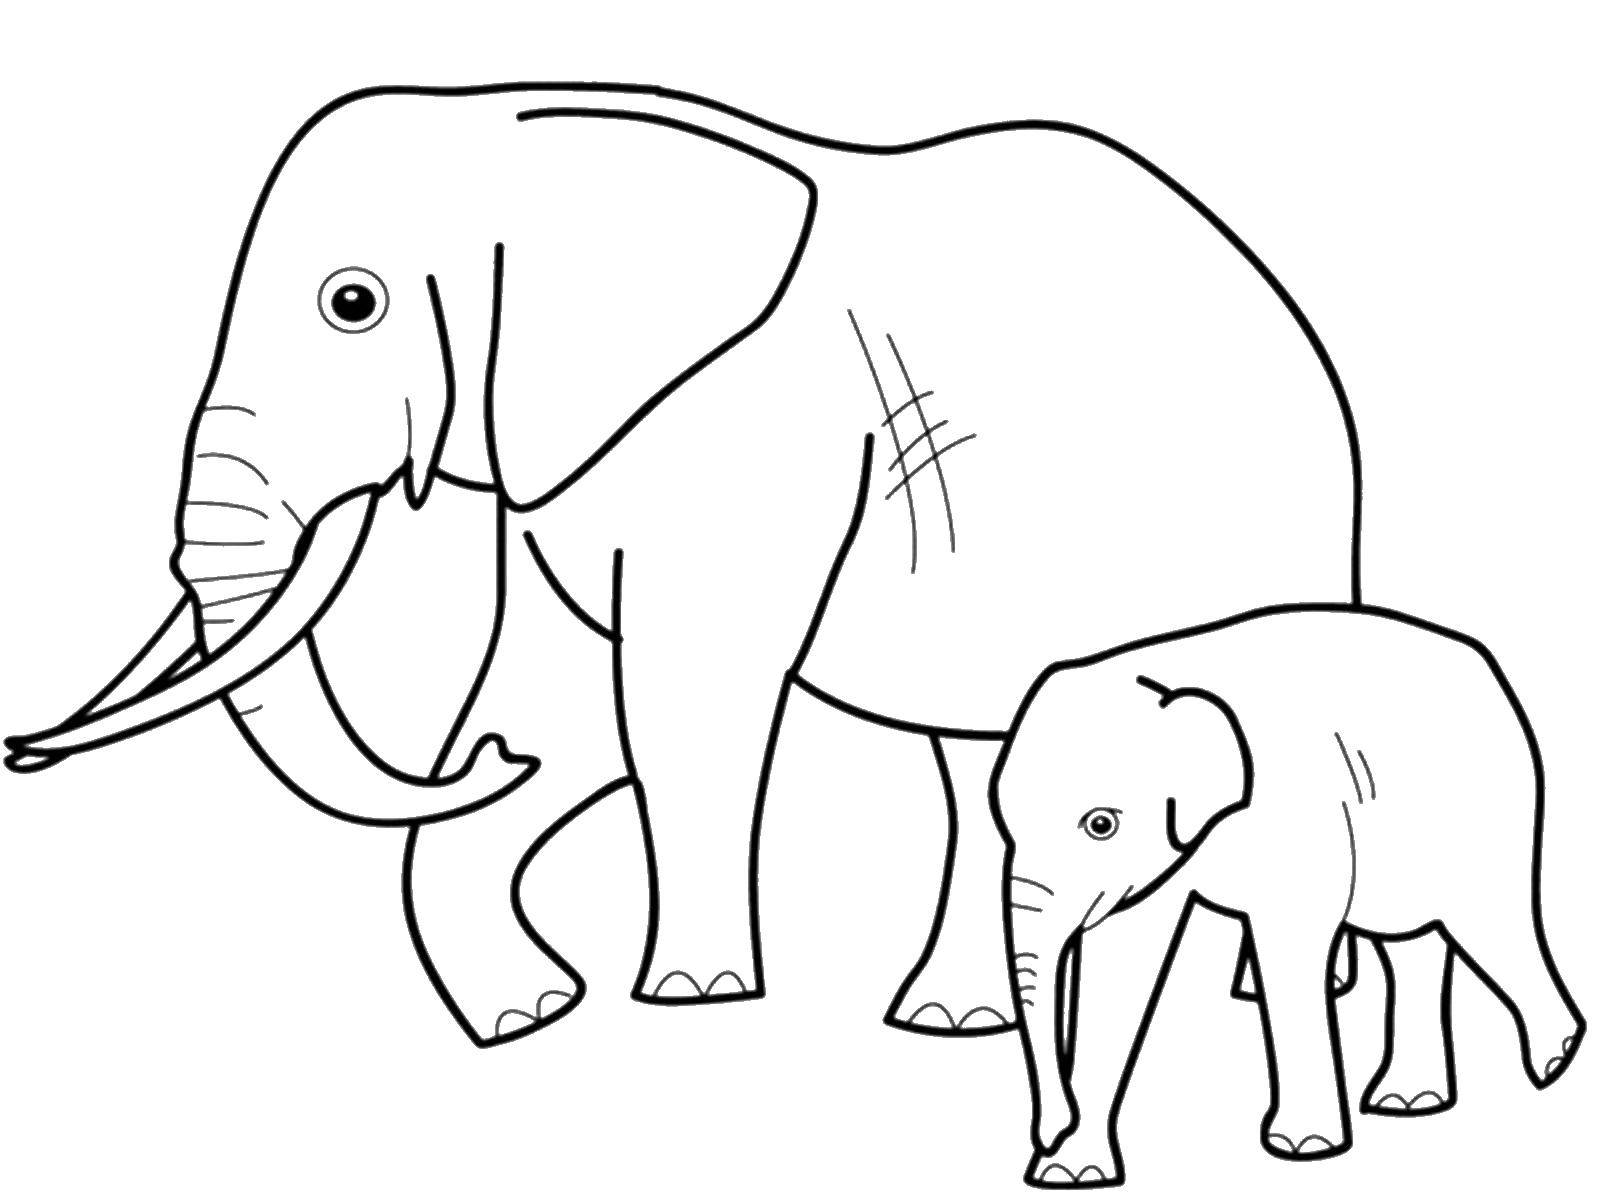 Coloring Elephant with a baby elephant. Category wild animals. Tags:  elephant.